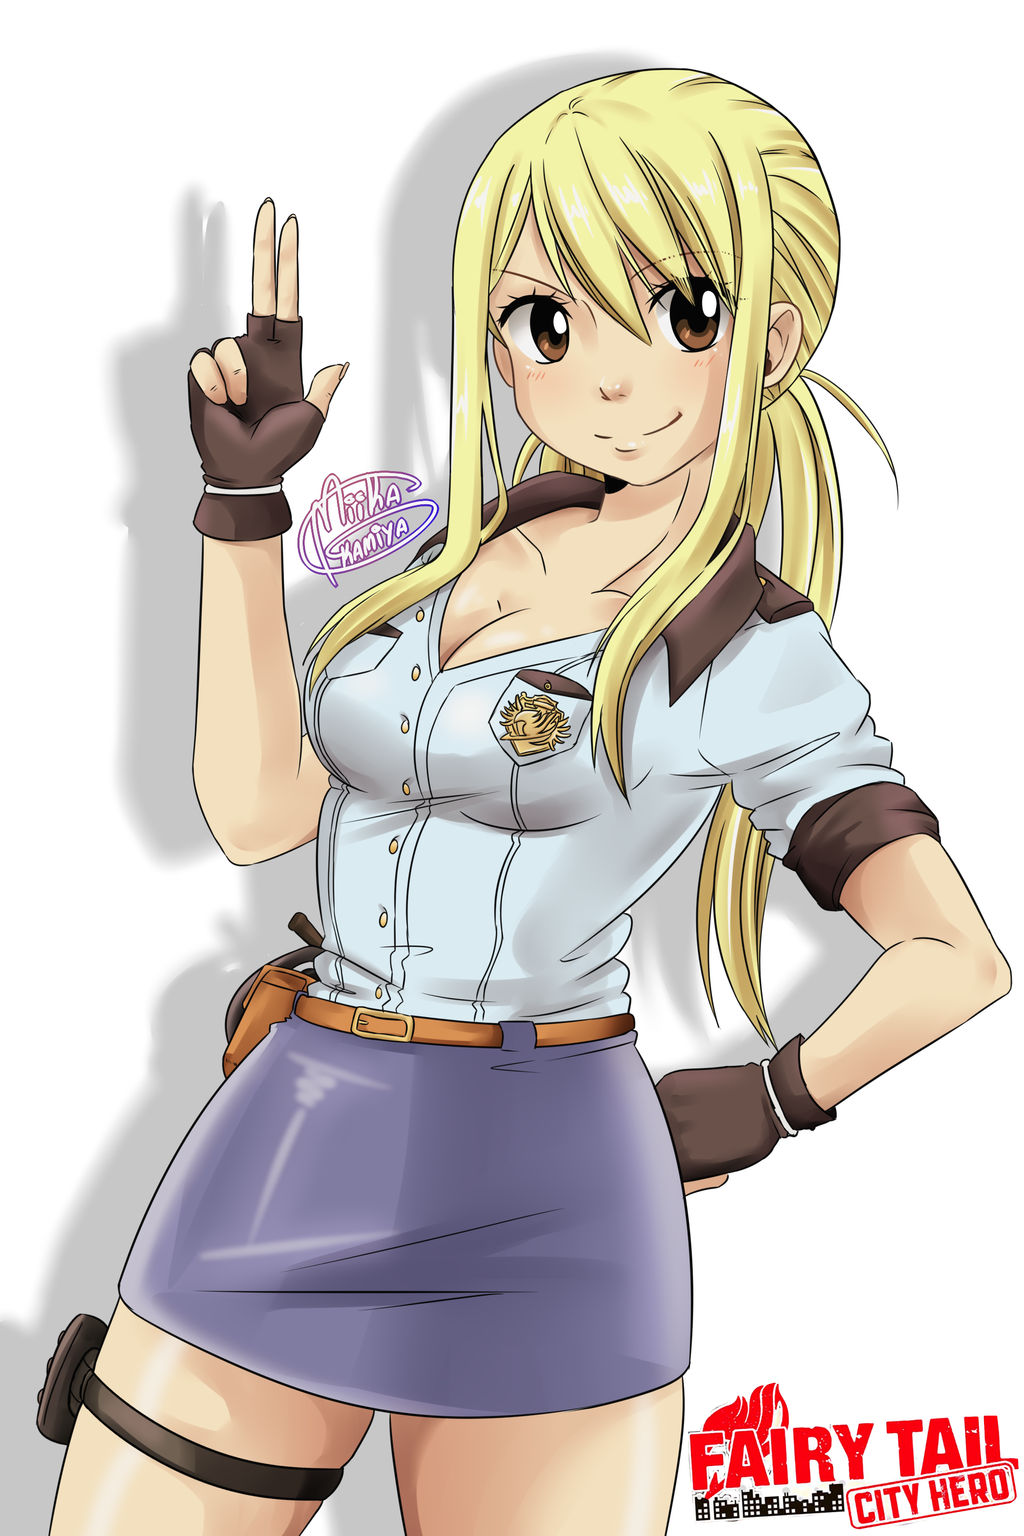 Anime Happy Lucy Heartfilia Wiki, anti hero, poster, fictional Character  png